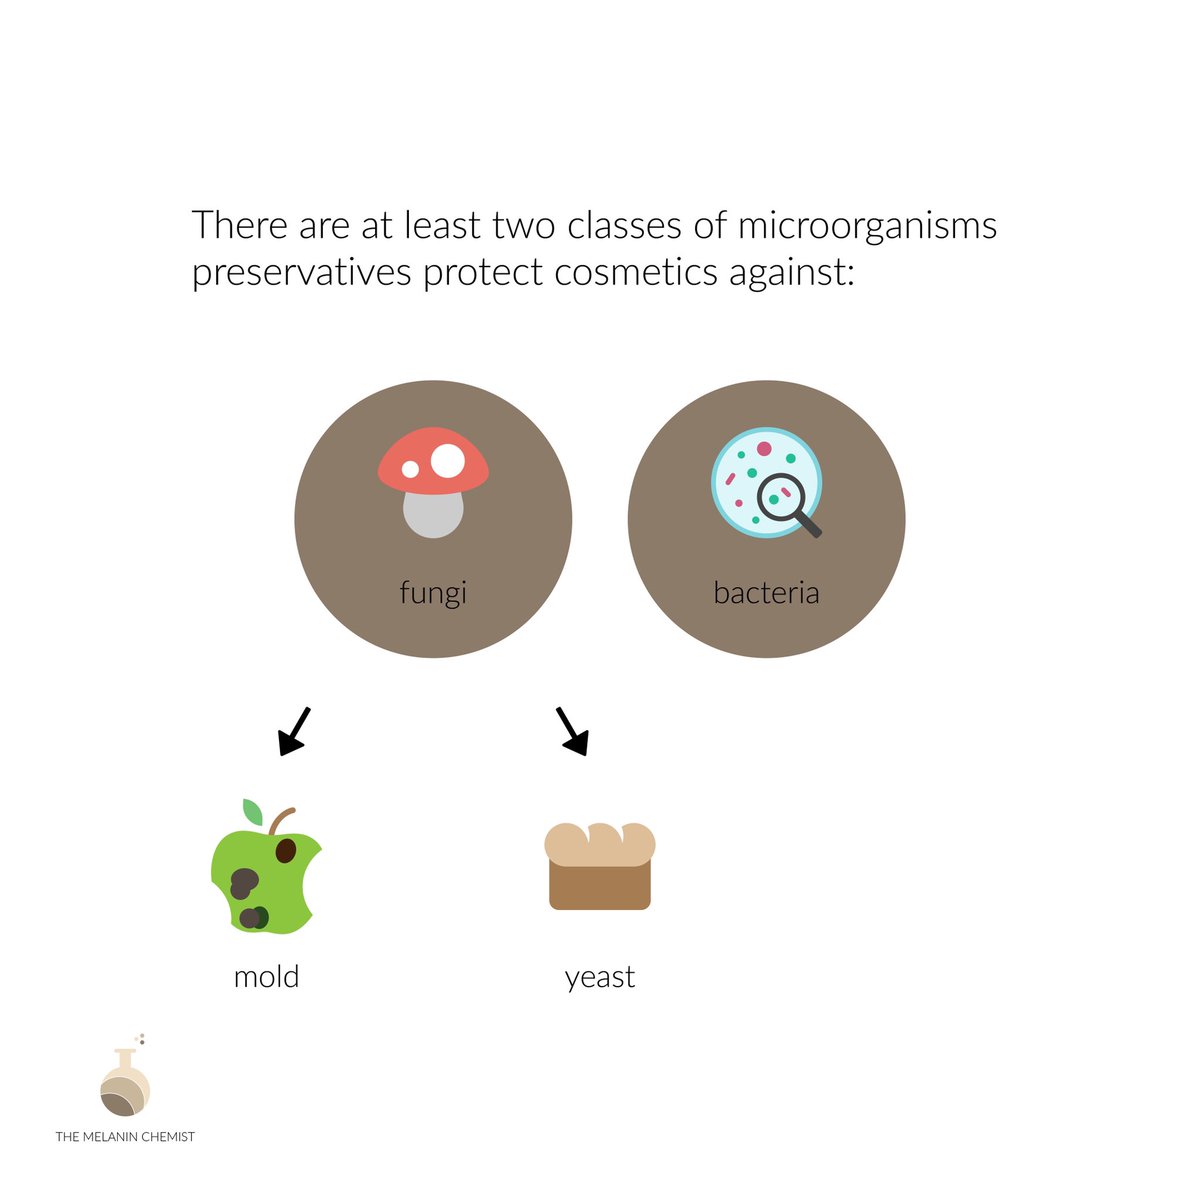 When it comes to microorganisms there are at least two classes that are a problem in cosmetics: Bacteria and Fungi. Remember there are several microorganisms under each category and not EVERY microorganism can be seen with the naked eye!